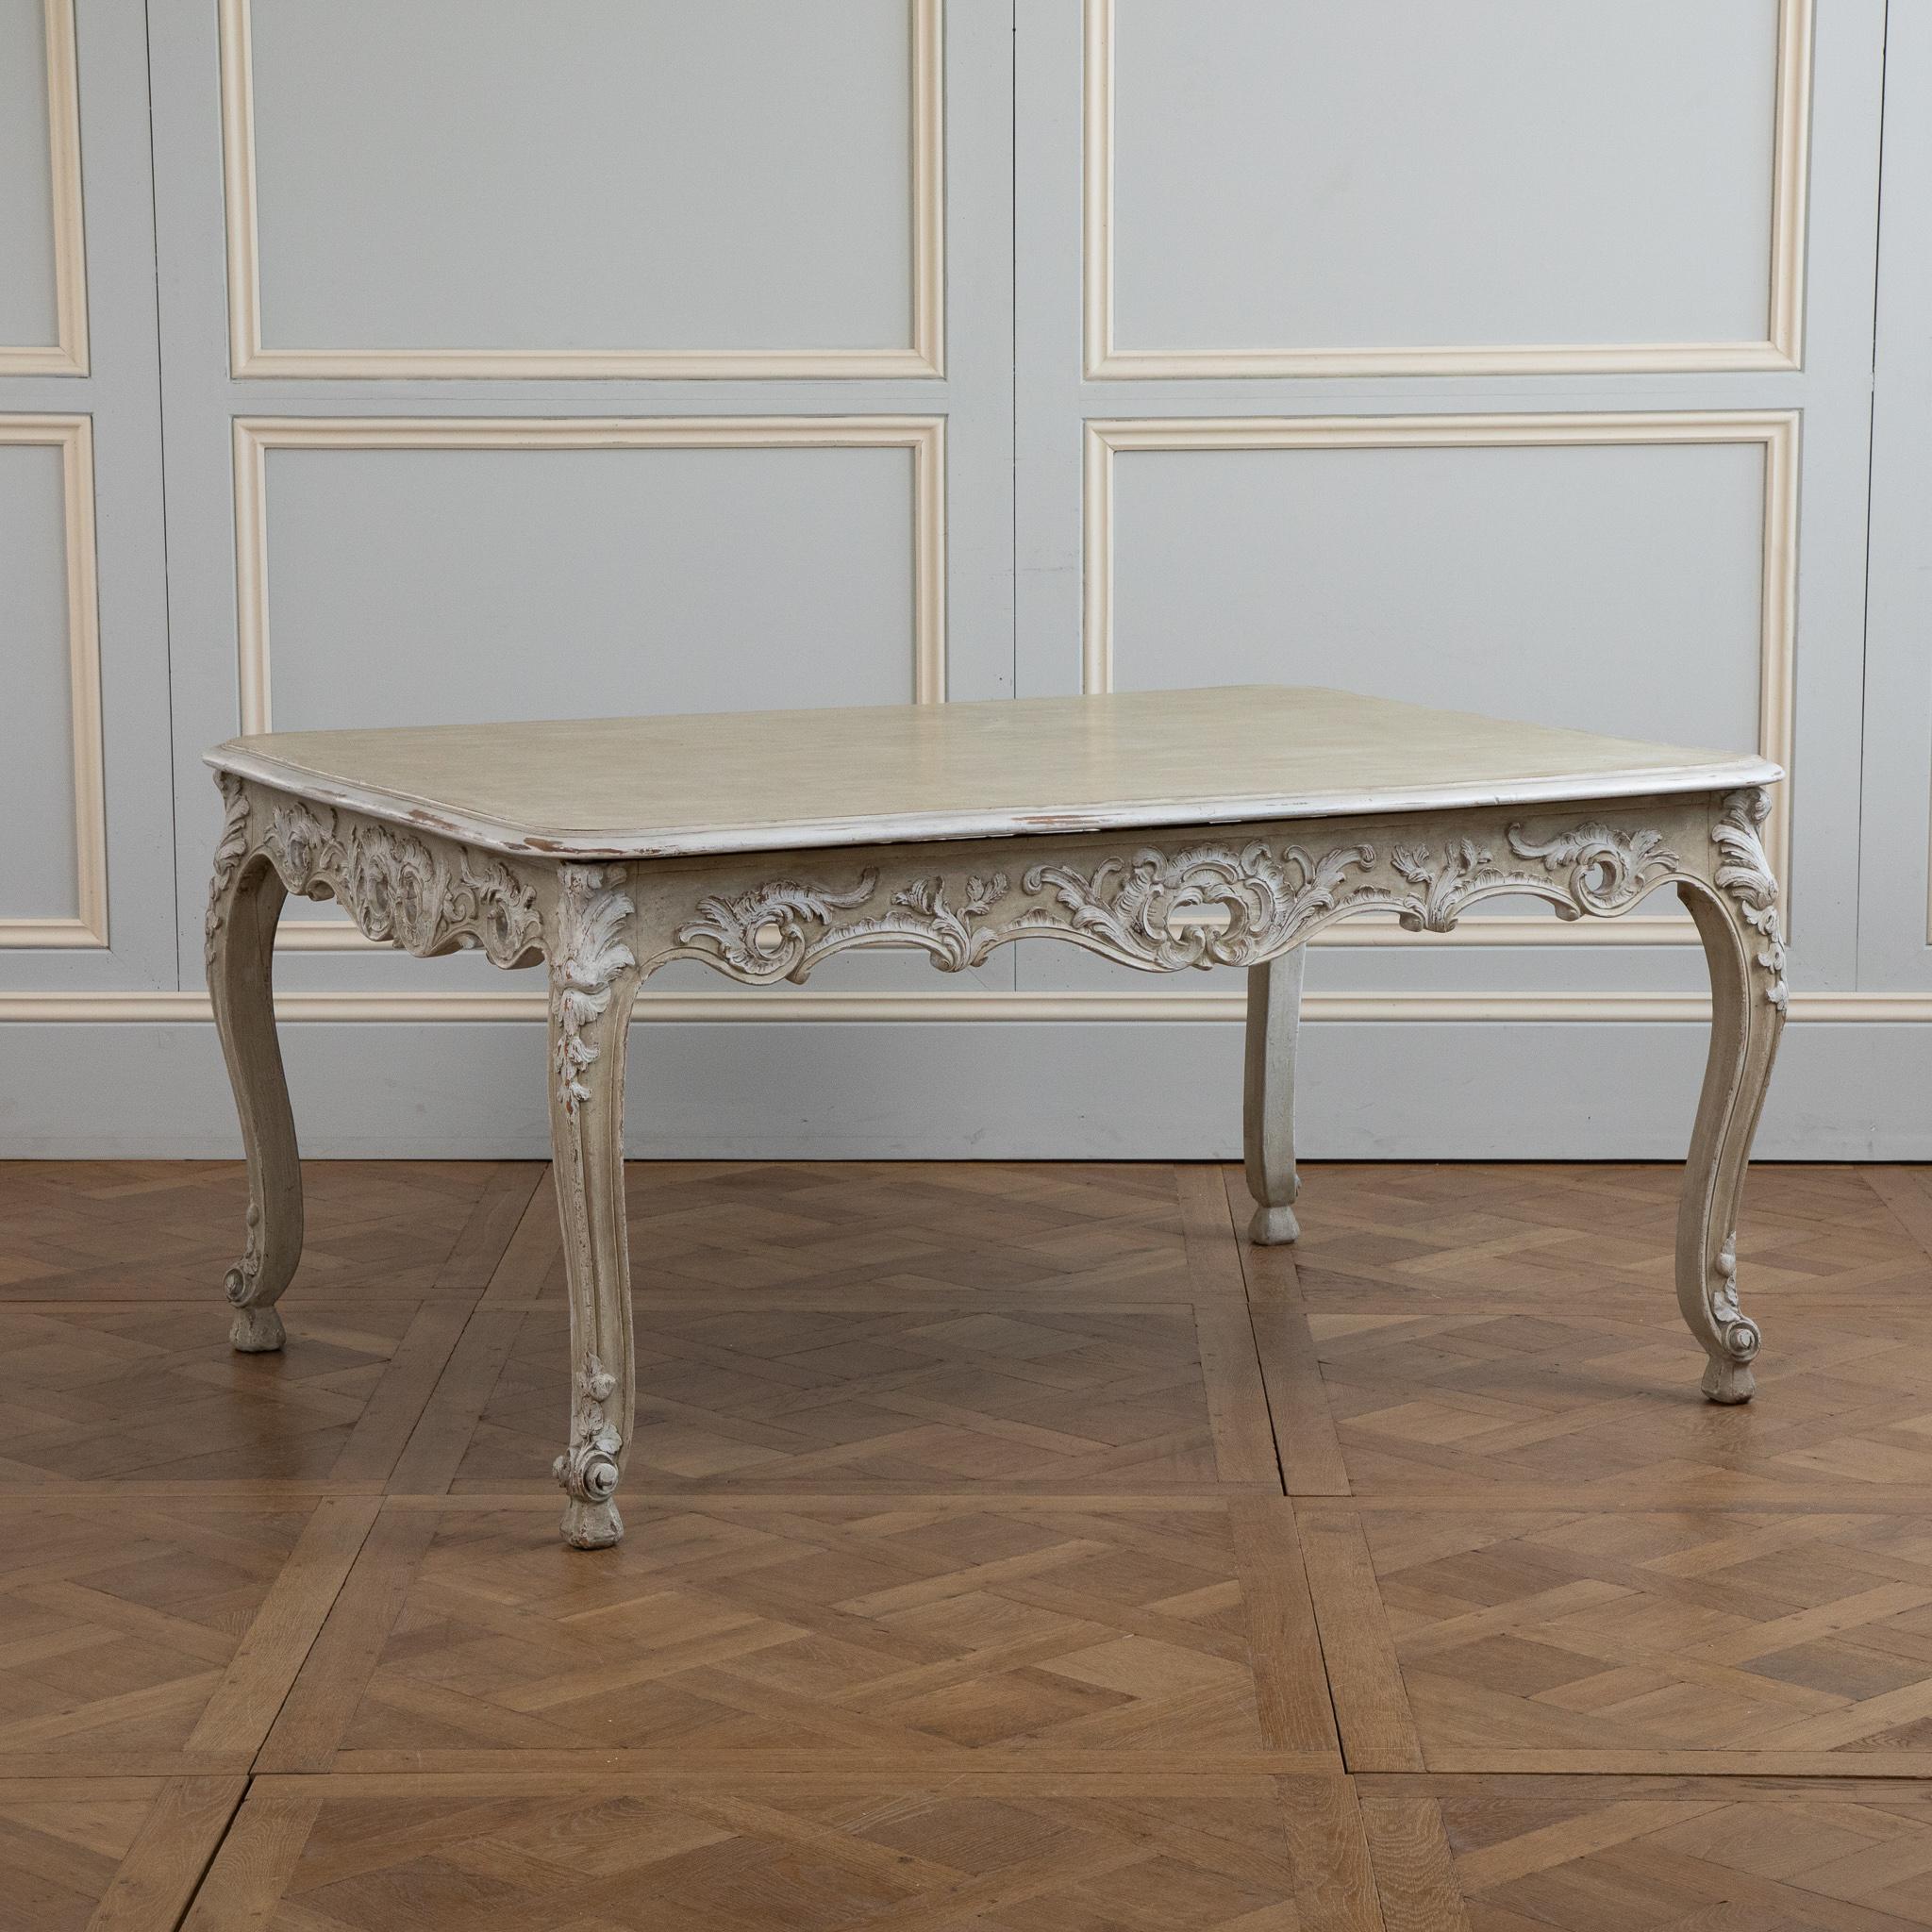 Louis XV style table in the Rococo style.
finely carved details with acanthus leafs and Louis XV Shells.
Sitting on Serpentine legs with generous Scrolled feet. 
painted in a French Sage green with white highlights
Can be used as Dinning table or